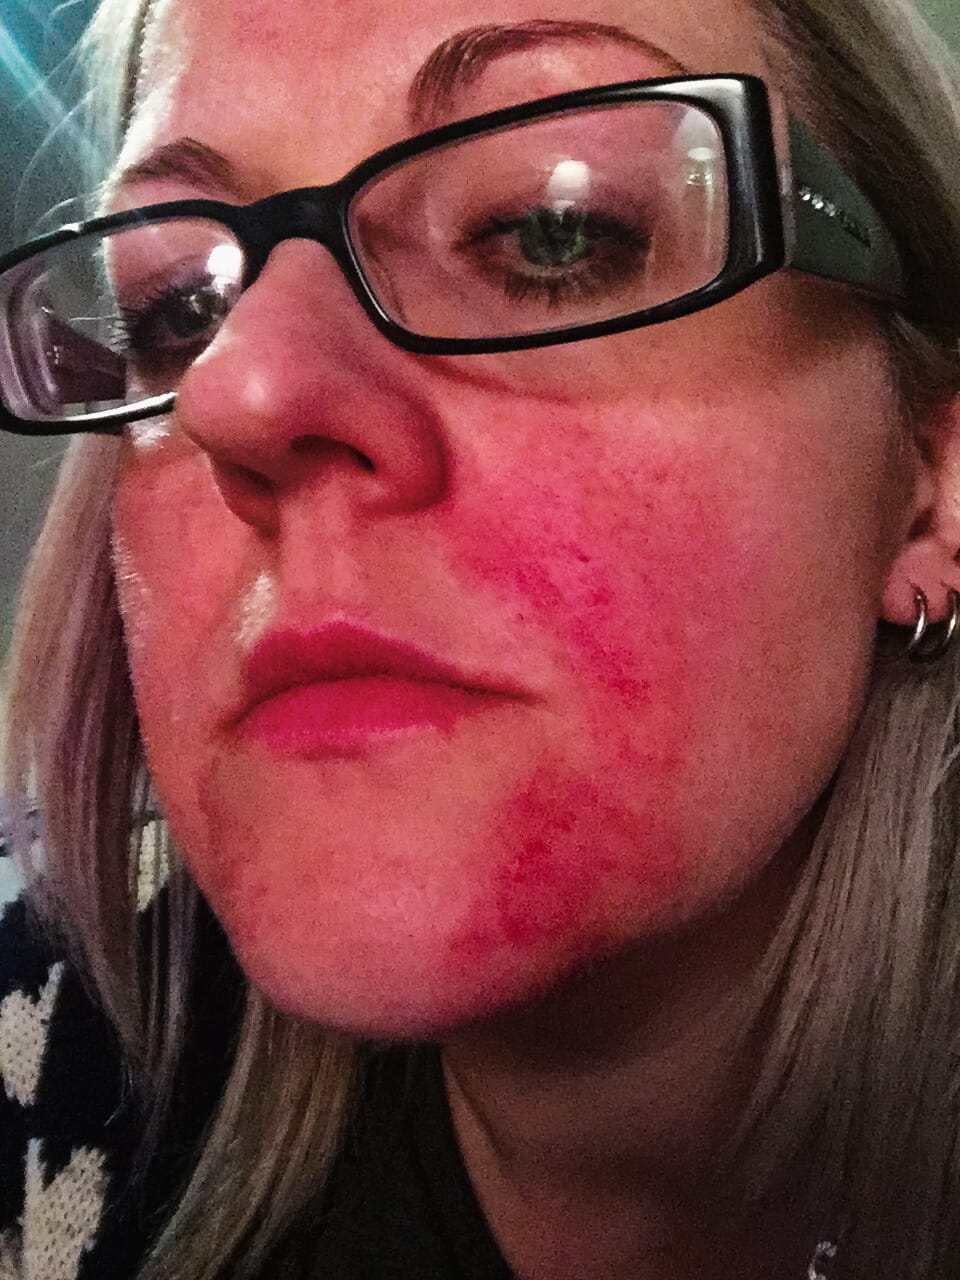 Heartbreak caused one woman's rosacea ravaged skin until Kalme came to the rescue